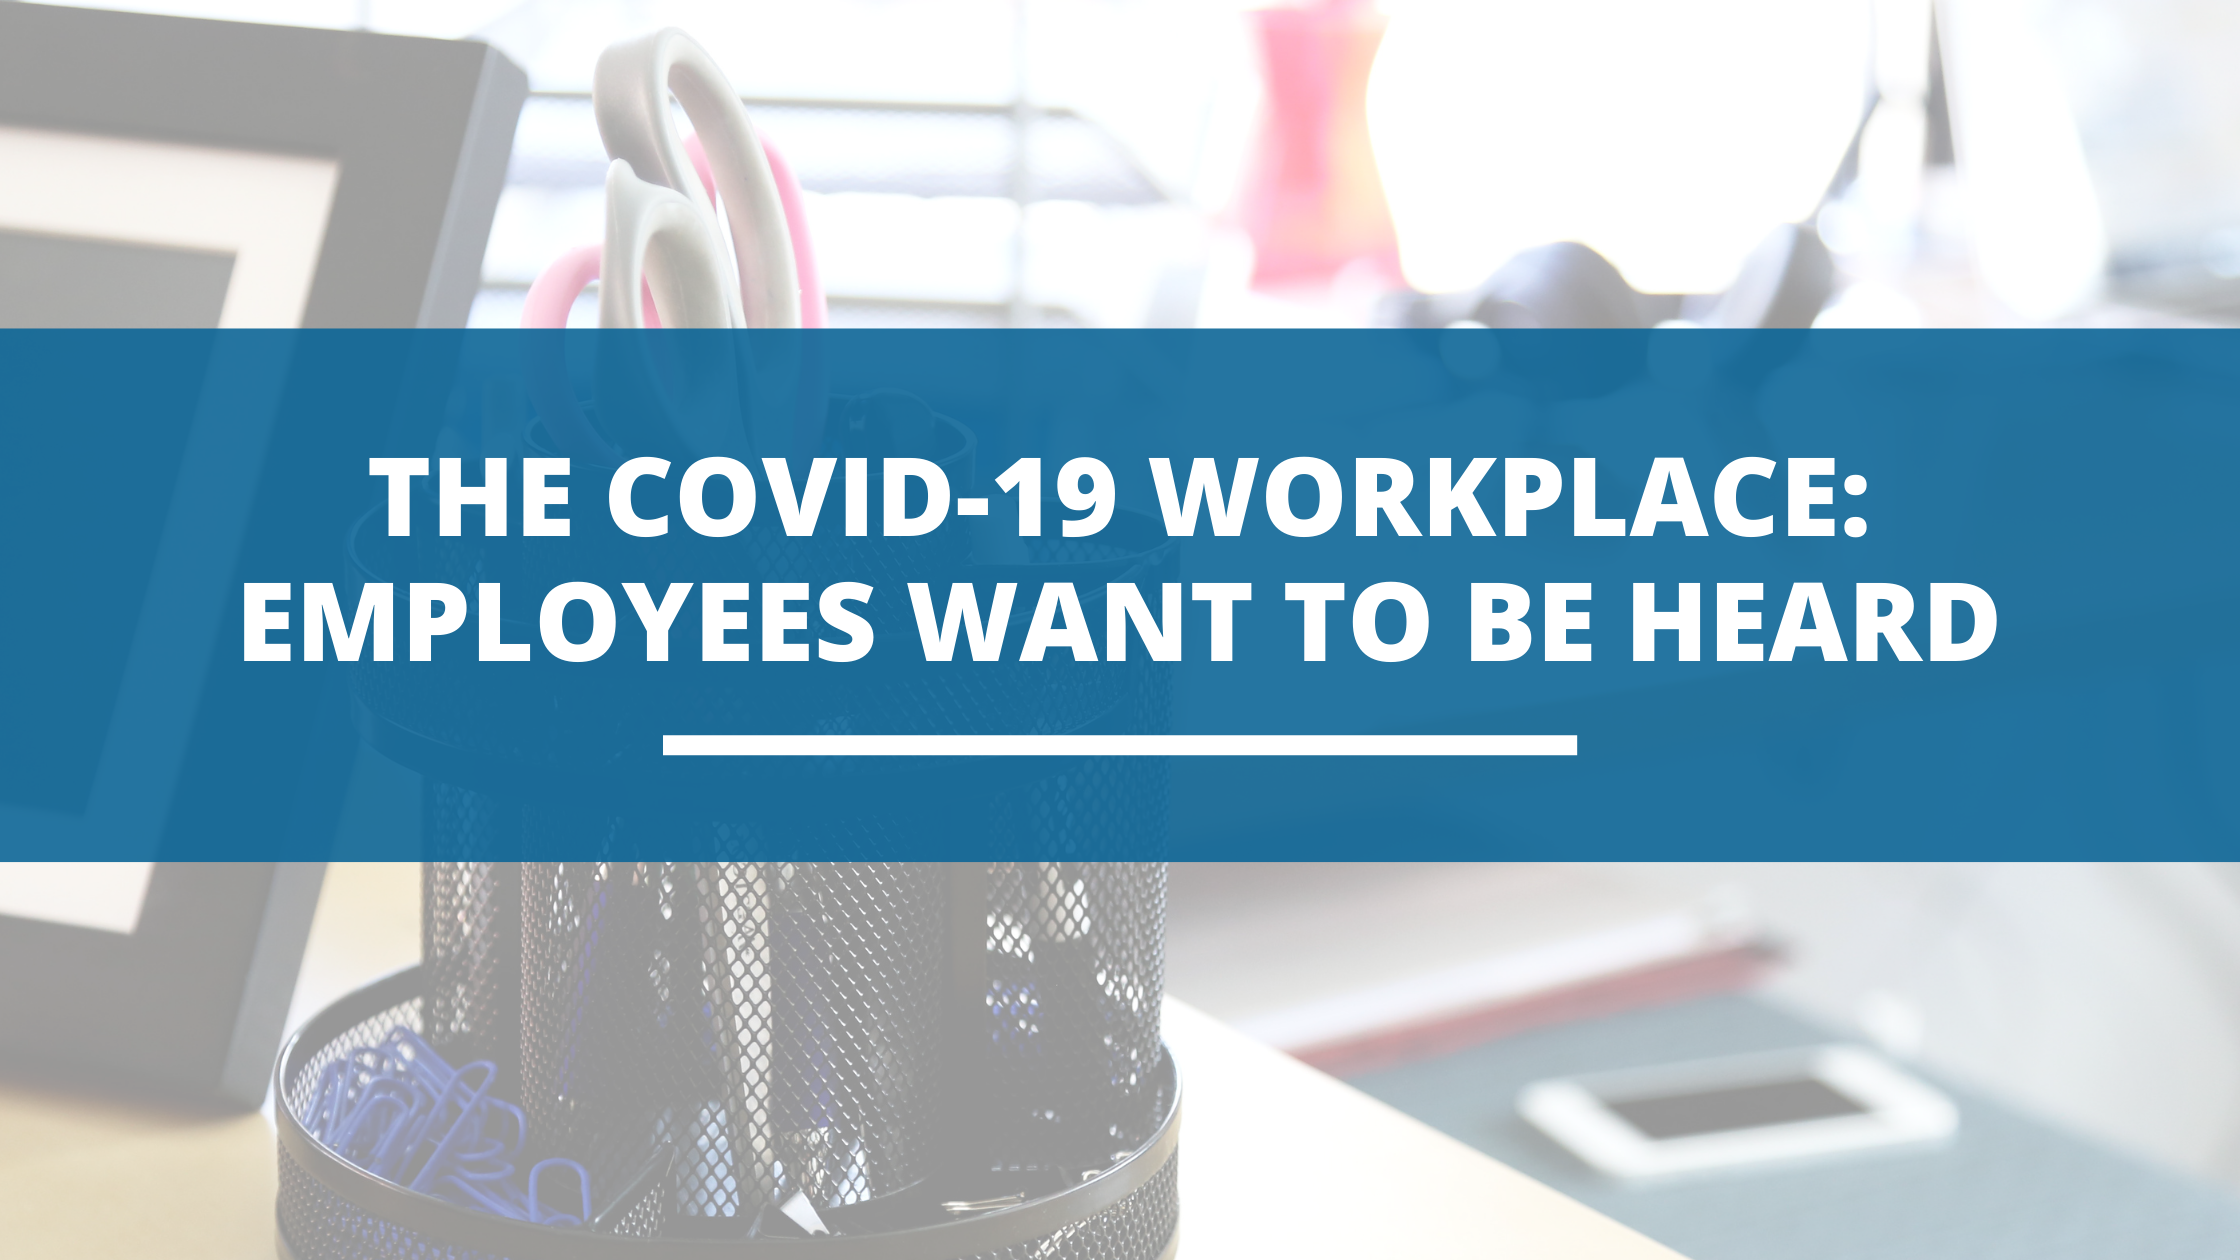 The COVID-19 Workplace: Employees want to be heard